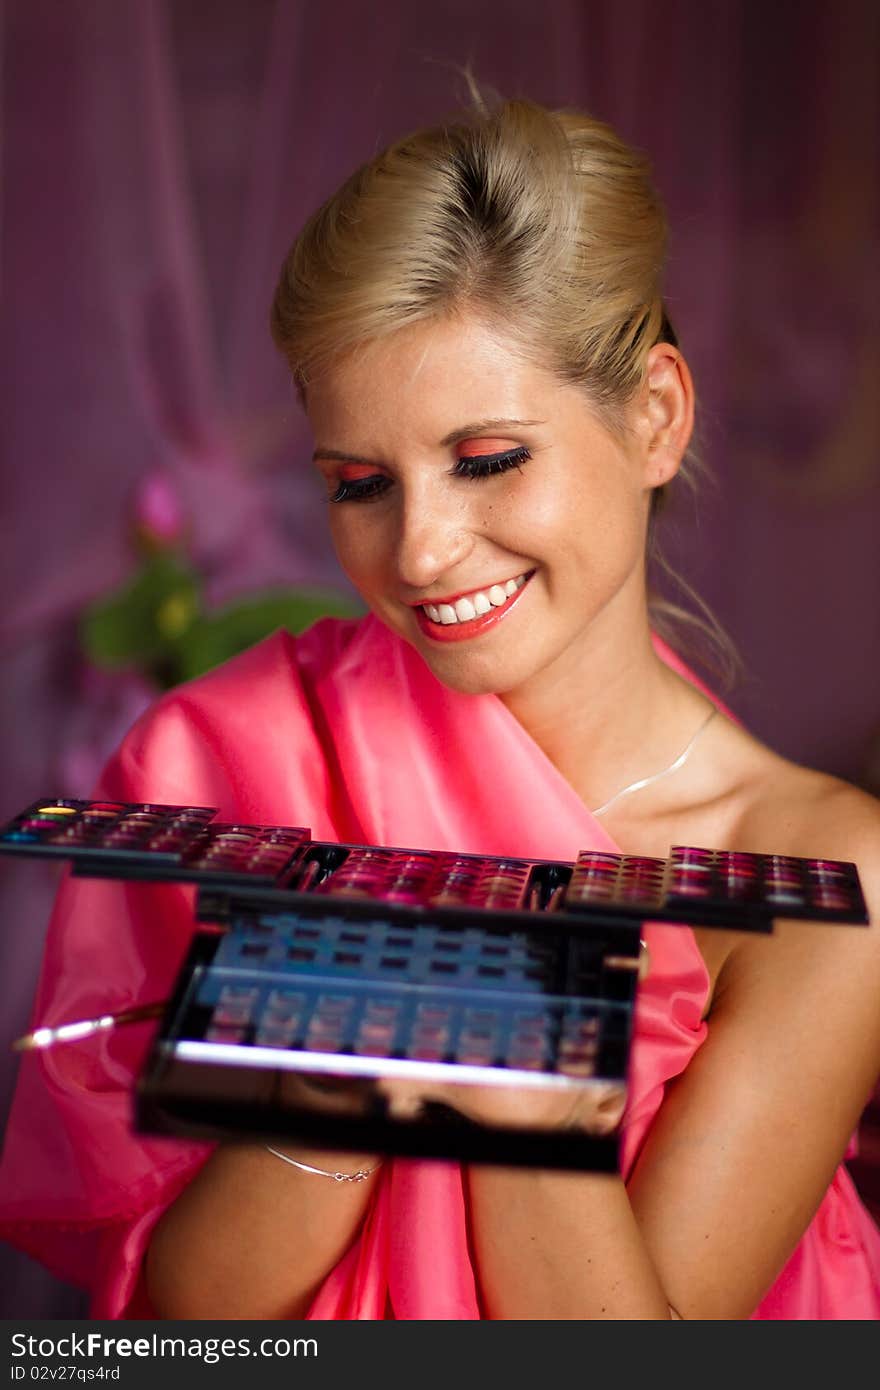 Beautiful girl holding a set of colored lipsticks for make-up. Beautiful girl holding a set of colored lipsticks for make-up